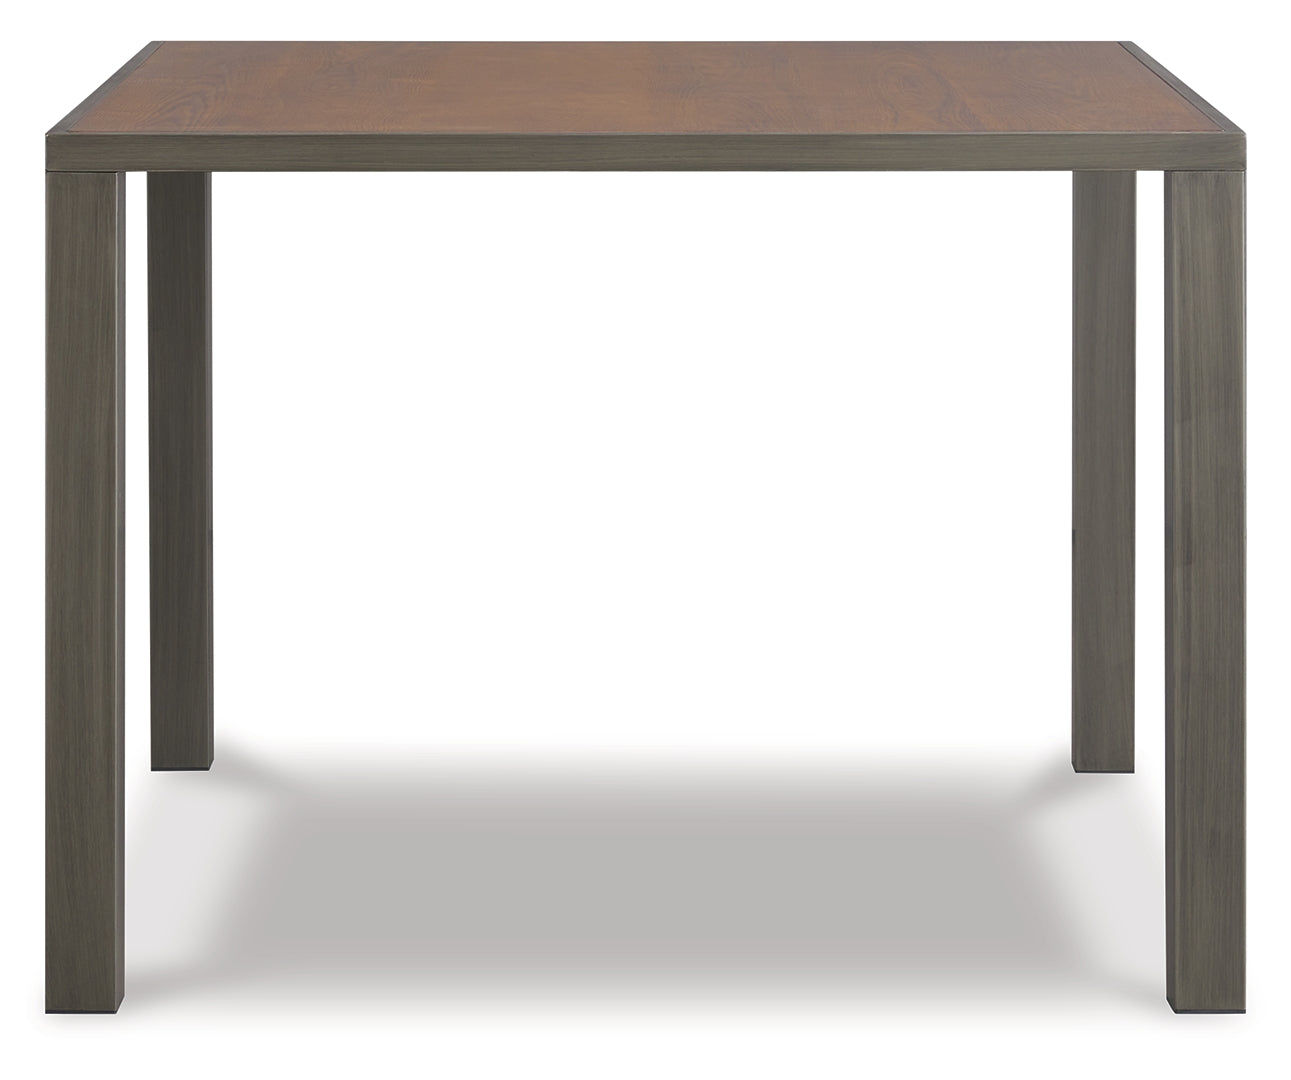 Stellany Counter Height Dining Table